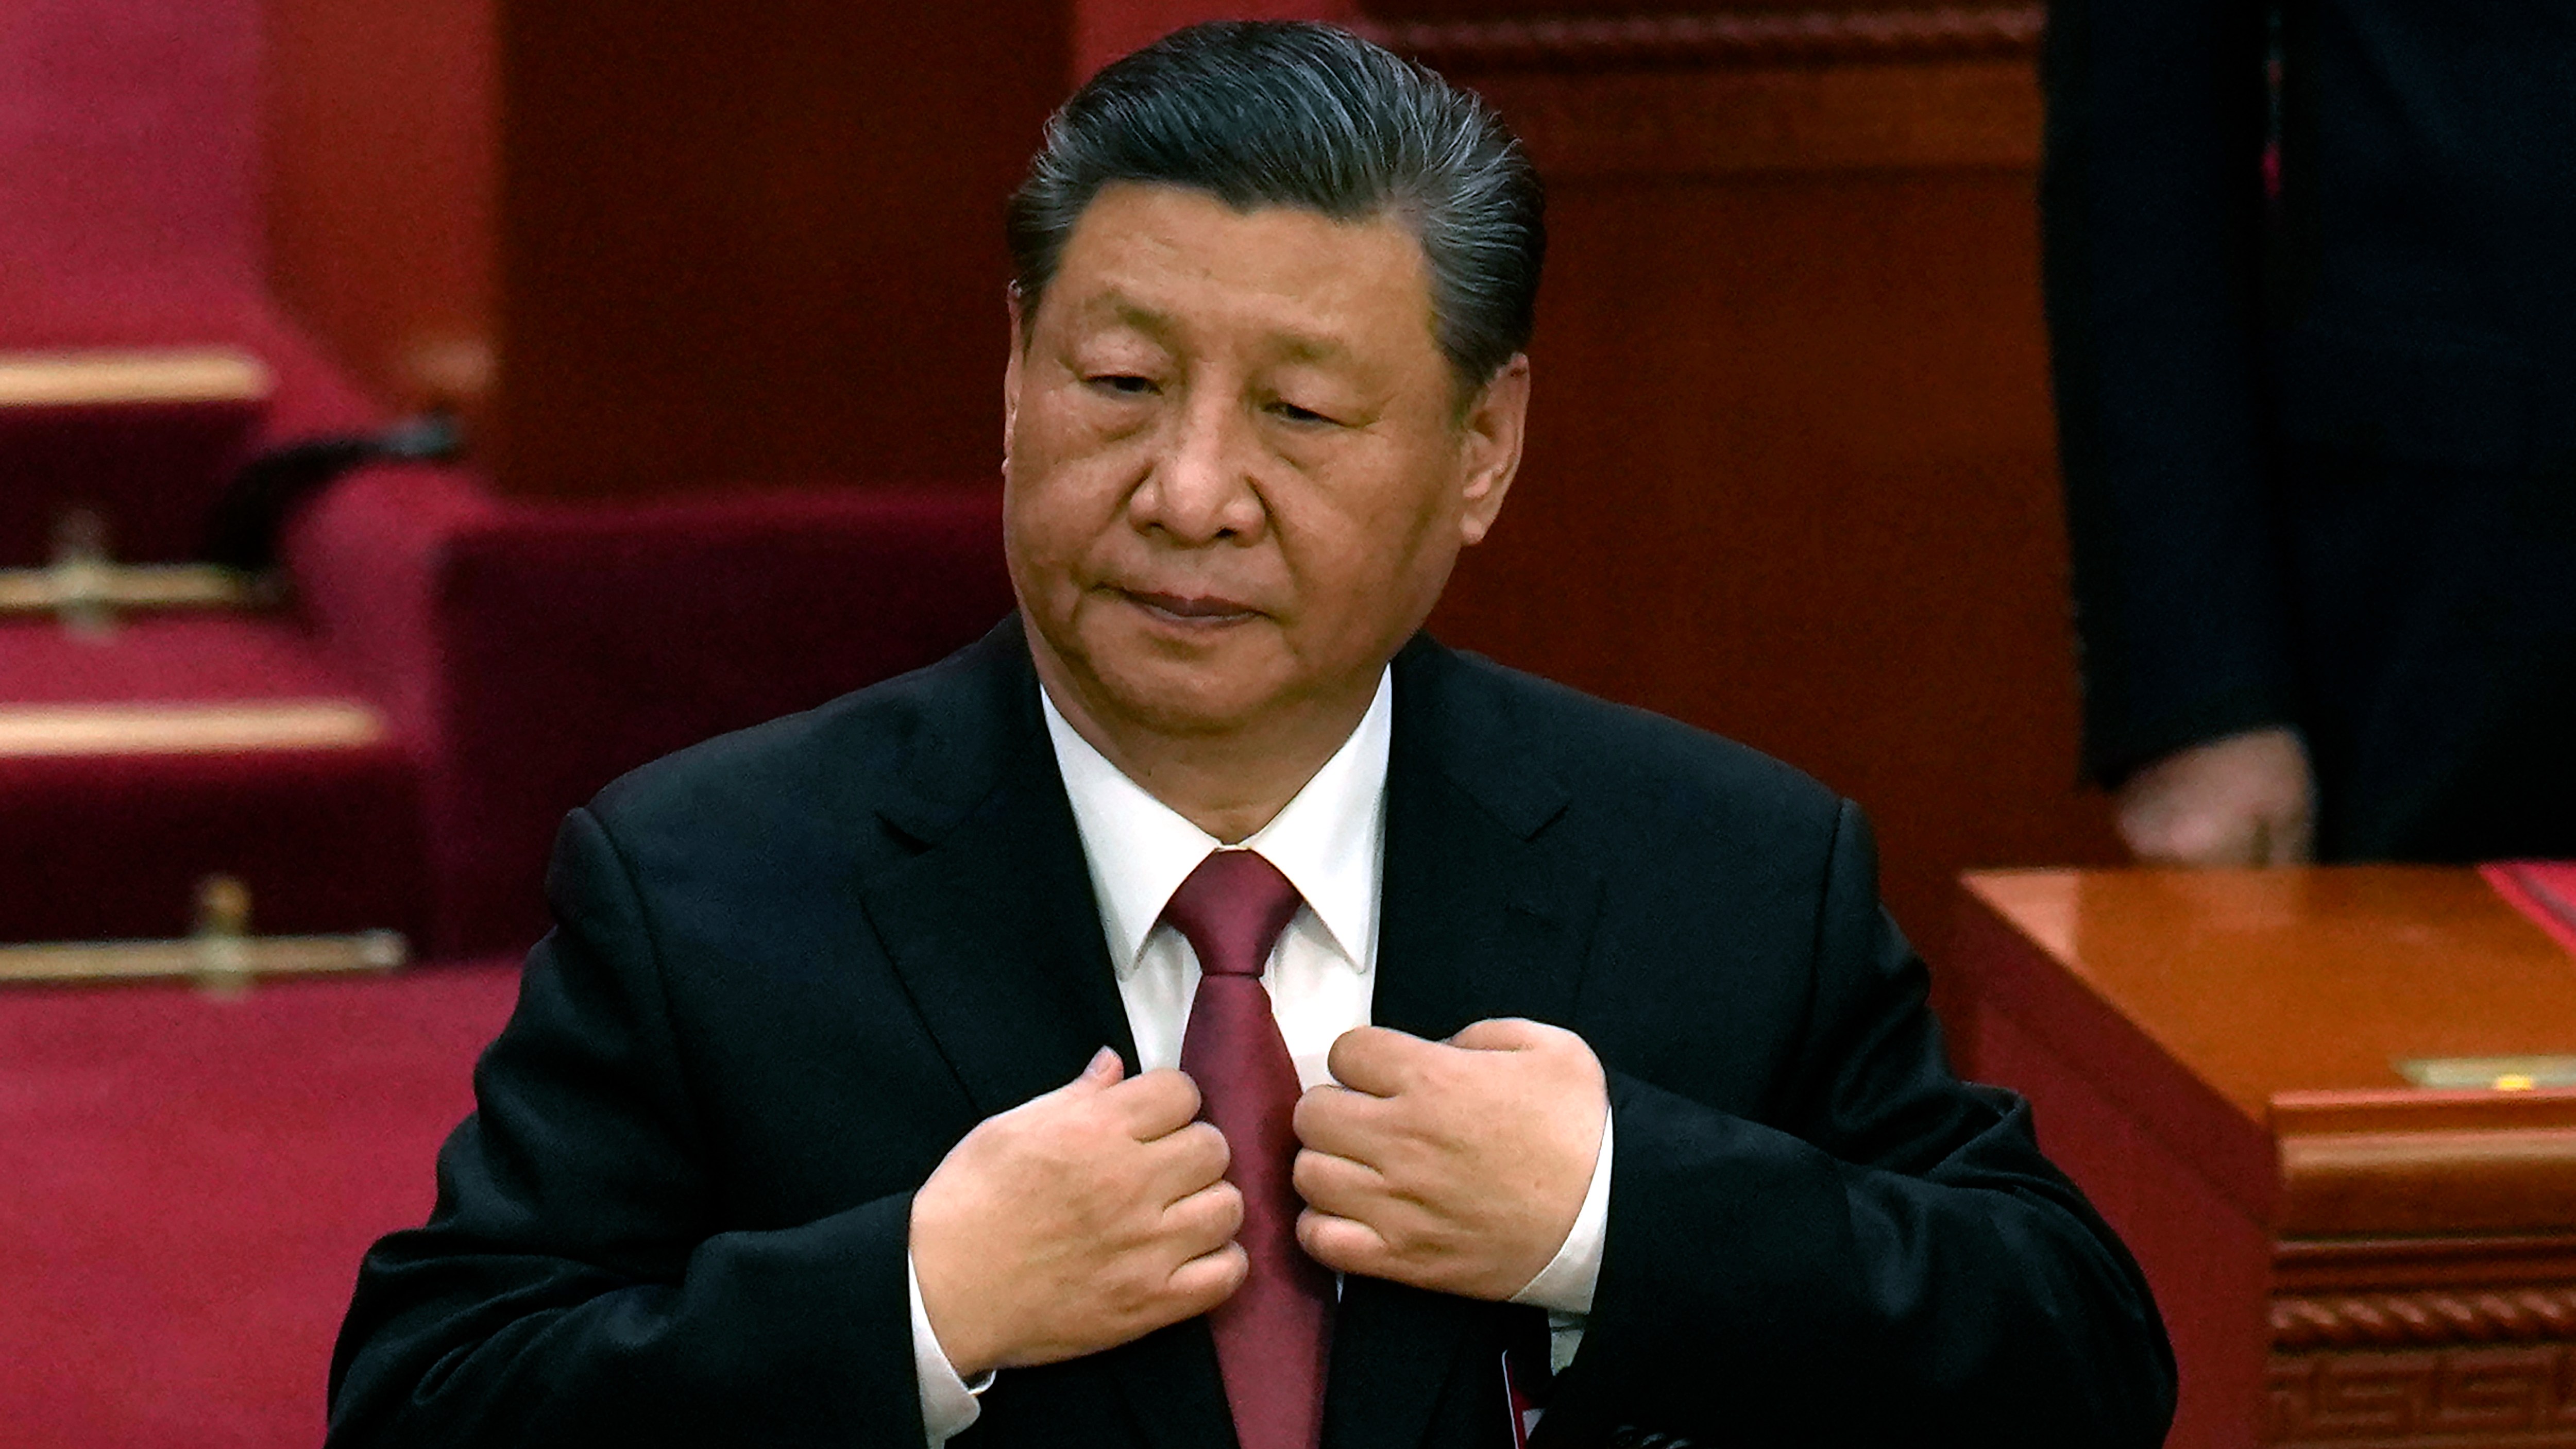 Almost 300 cases have been documented since President Xi launched his war on corruption in 2013